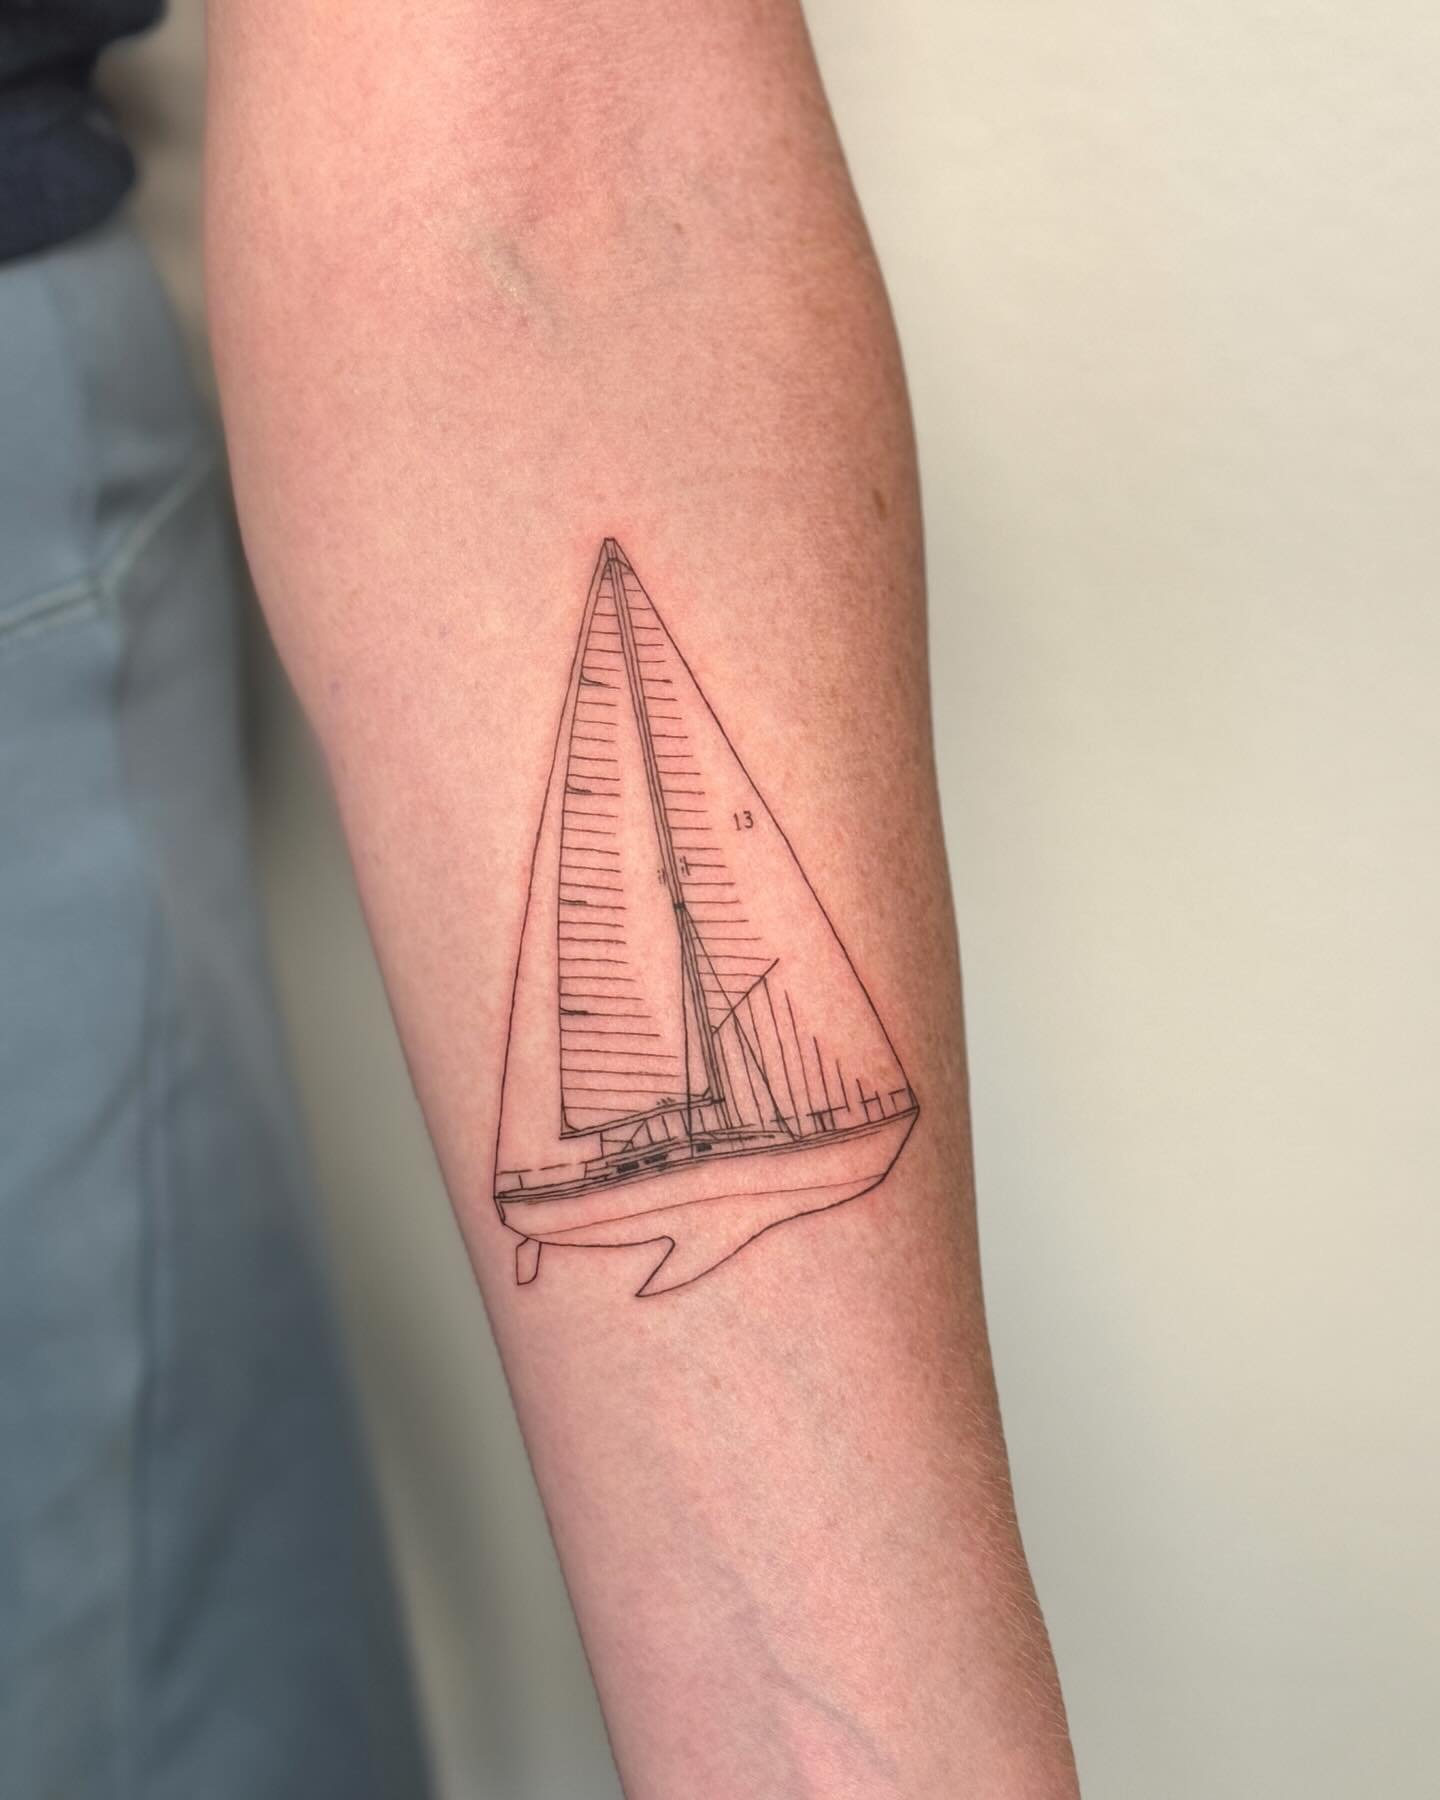 No coffee was consumed in the making of this tattoo ☕️ 

Suuch an amazing session with the daughter of the man who designed this beautiful sailboat. Thank you for sharing such a special project with me, Kira! ❤️

#seattletattoo #northbendtattoo #snoq